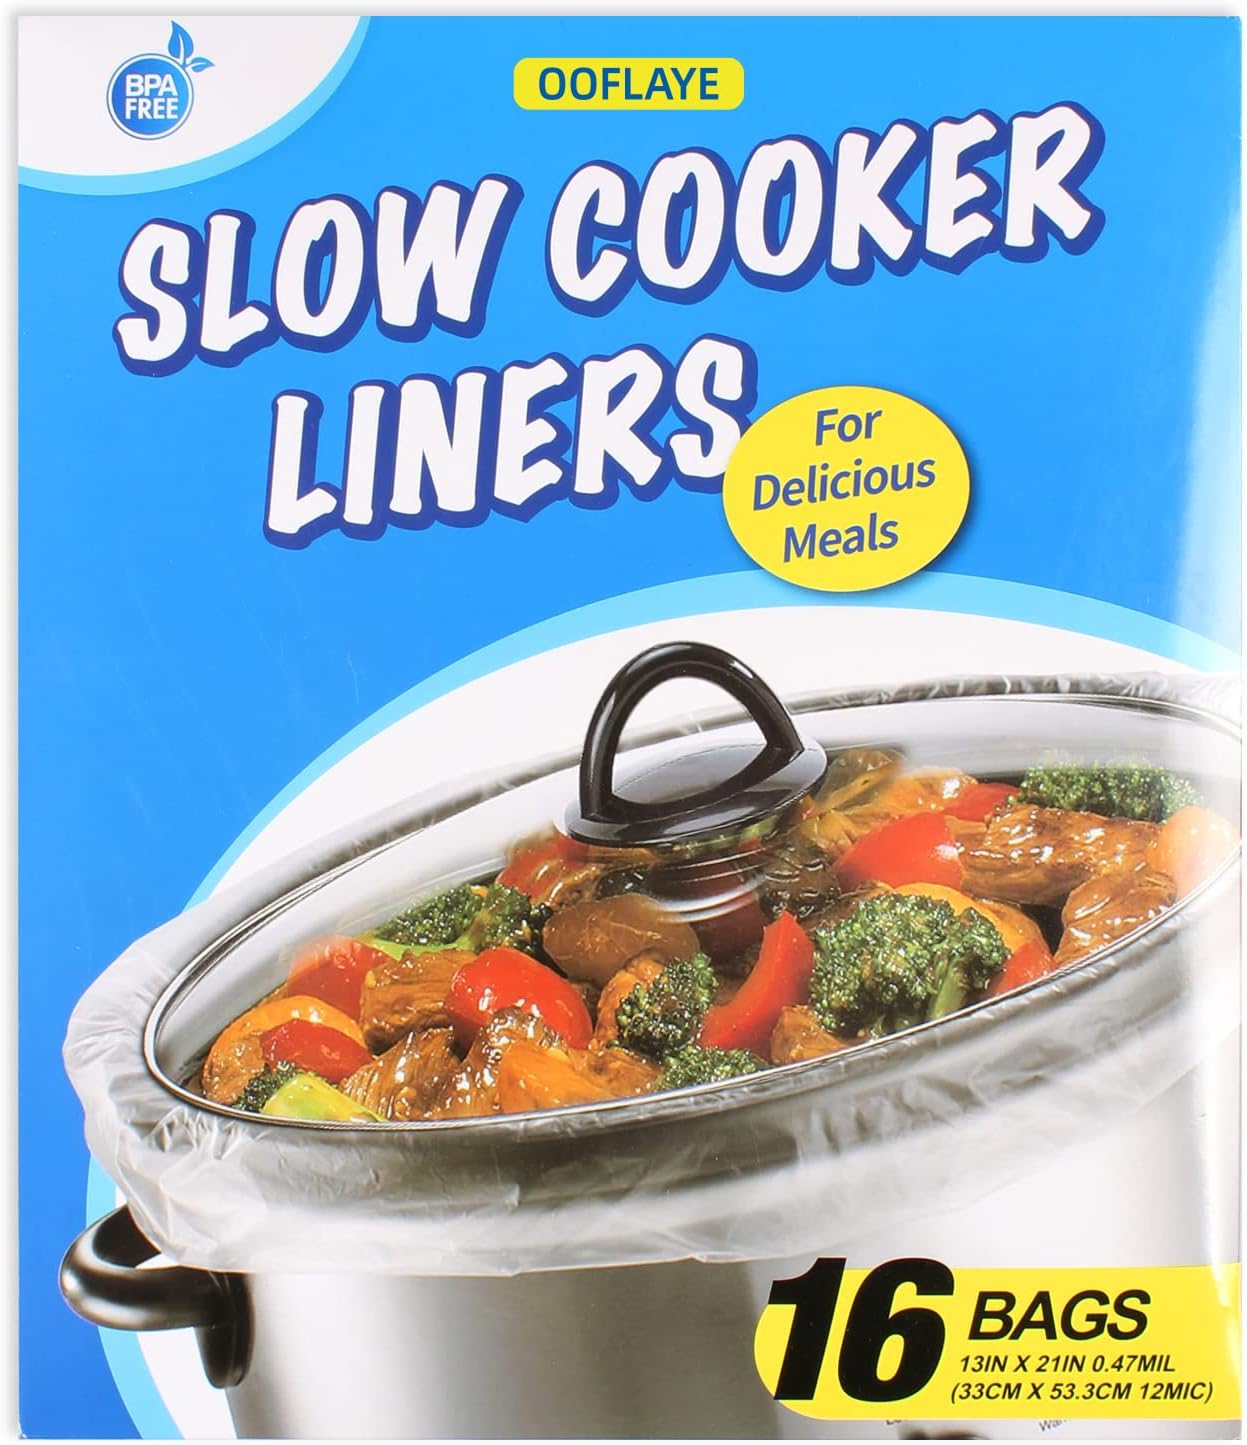 16 Bags Slow Cooker Liners, Disposable Multi Use Cooking Bags,Large Size Fit 3QT to 8QT, Plastic Bags for Slow Cooker, Pans, Aluminum Cooking Trays, BPA Free-13 x 21 Inches, 3 quarts (16)